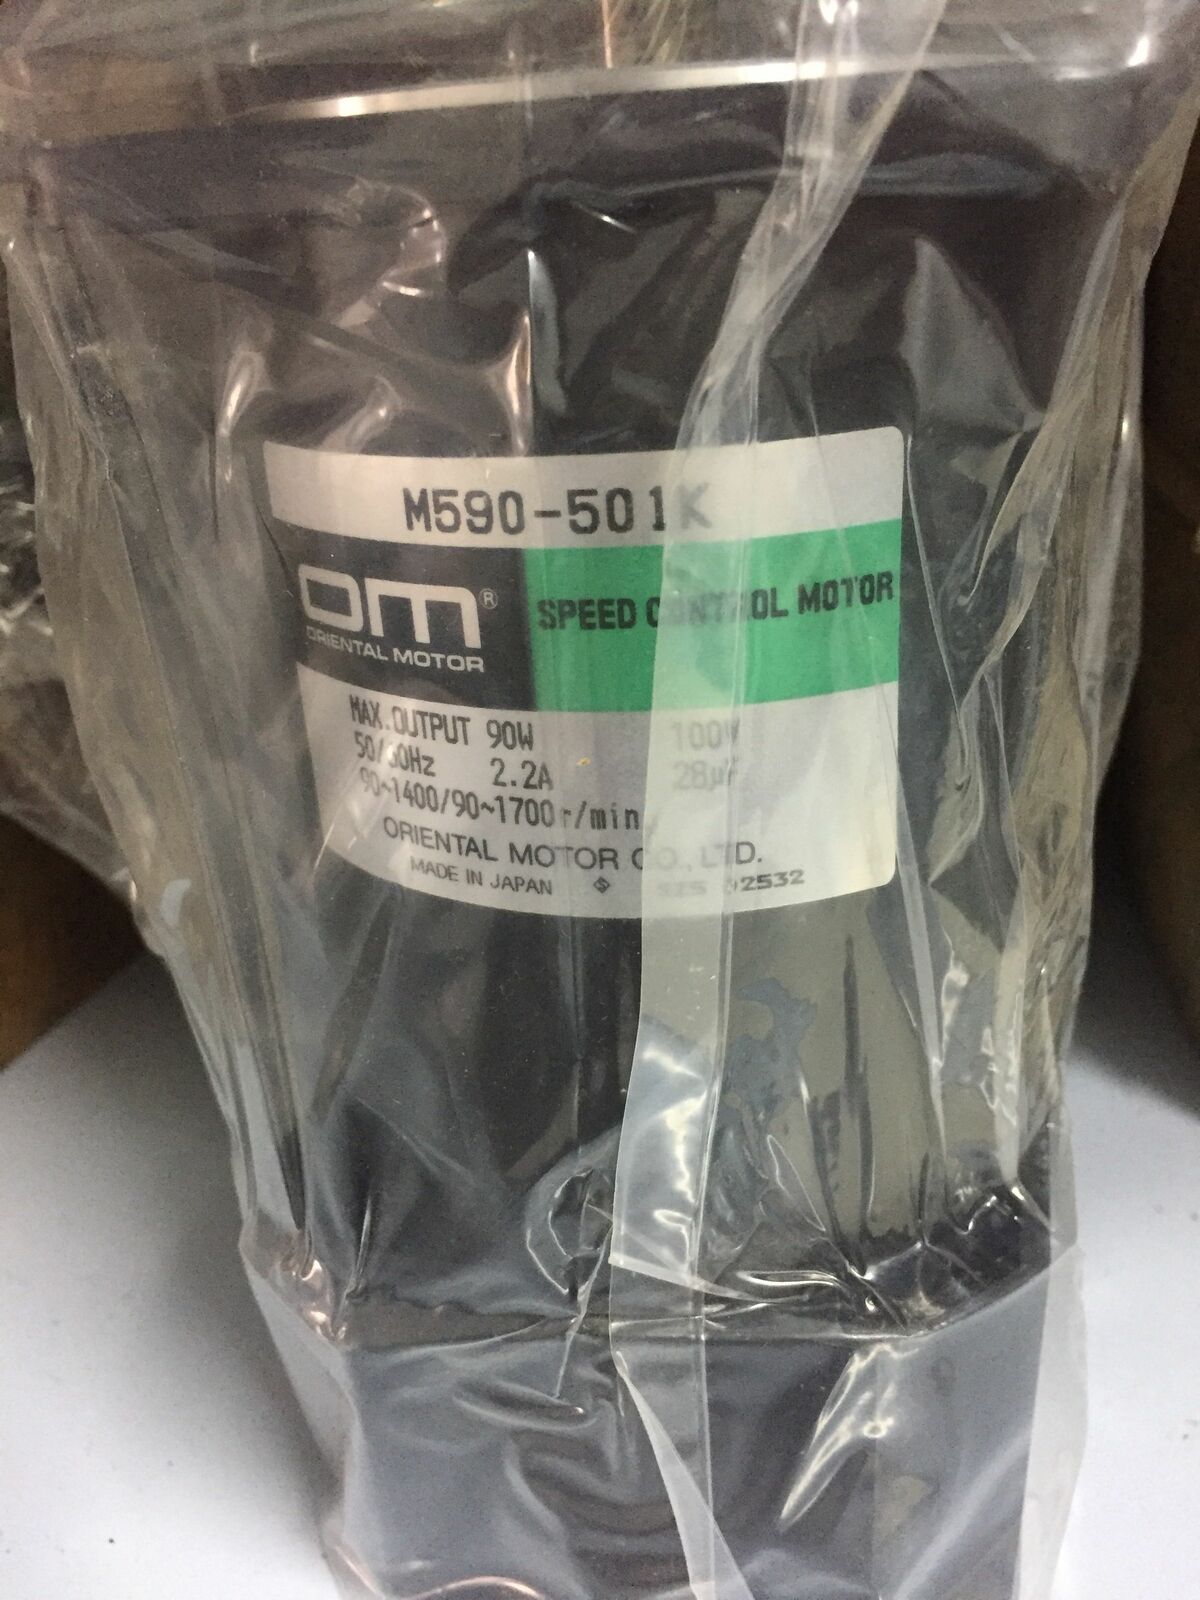 New ORIENTAL M590-501K Motor Expedited Shipping